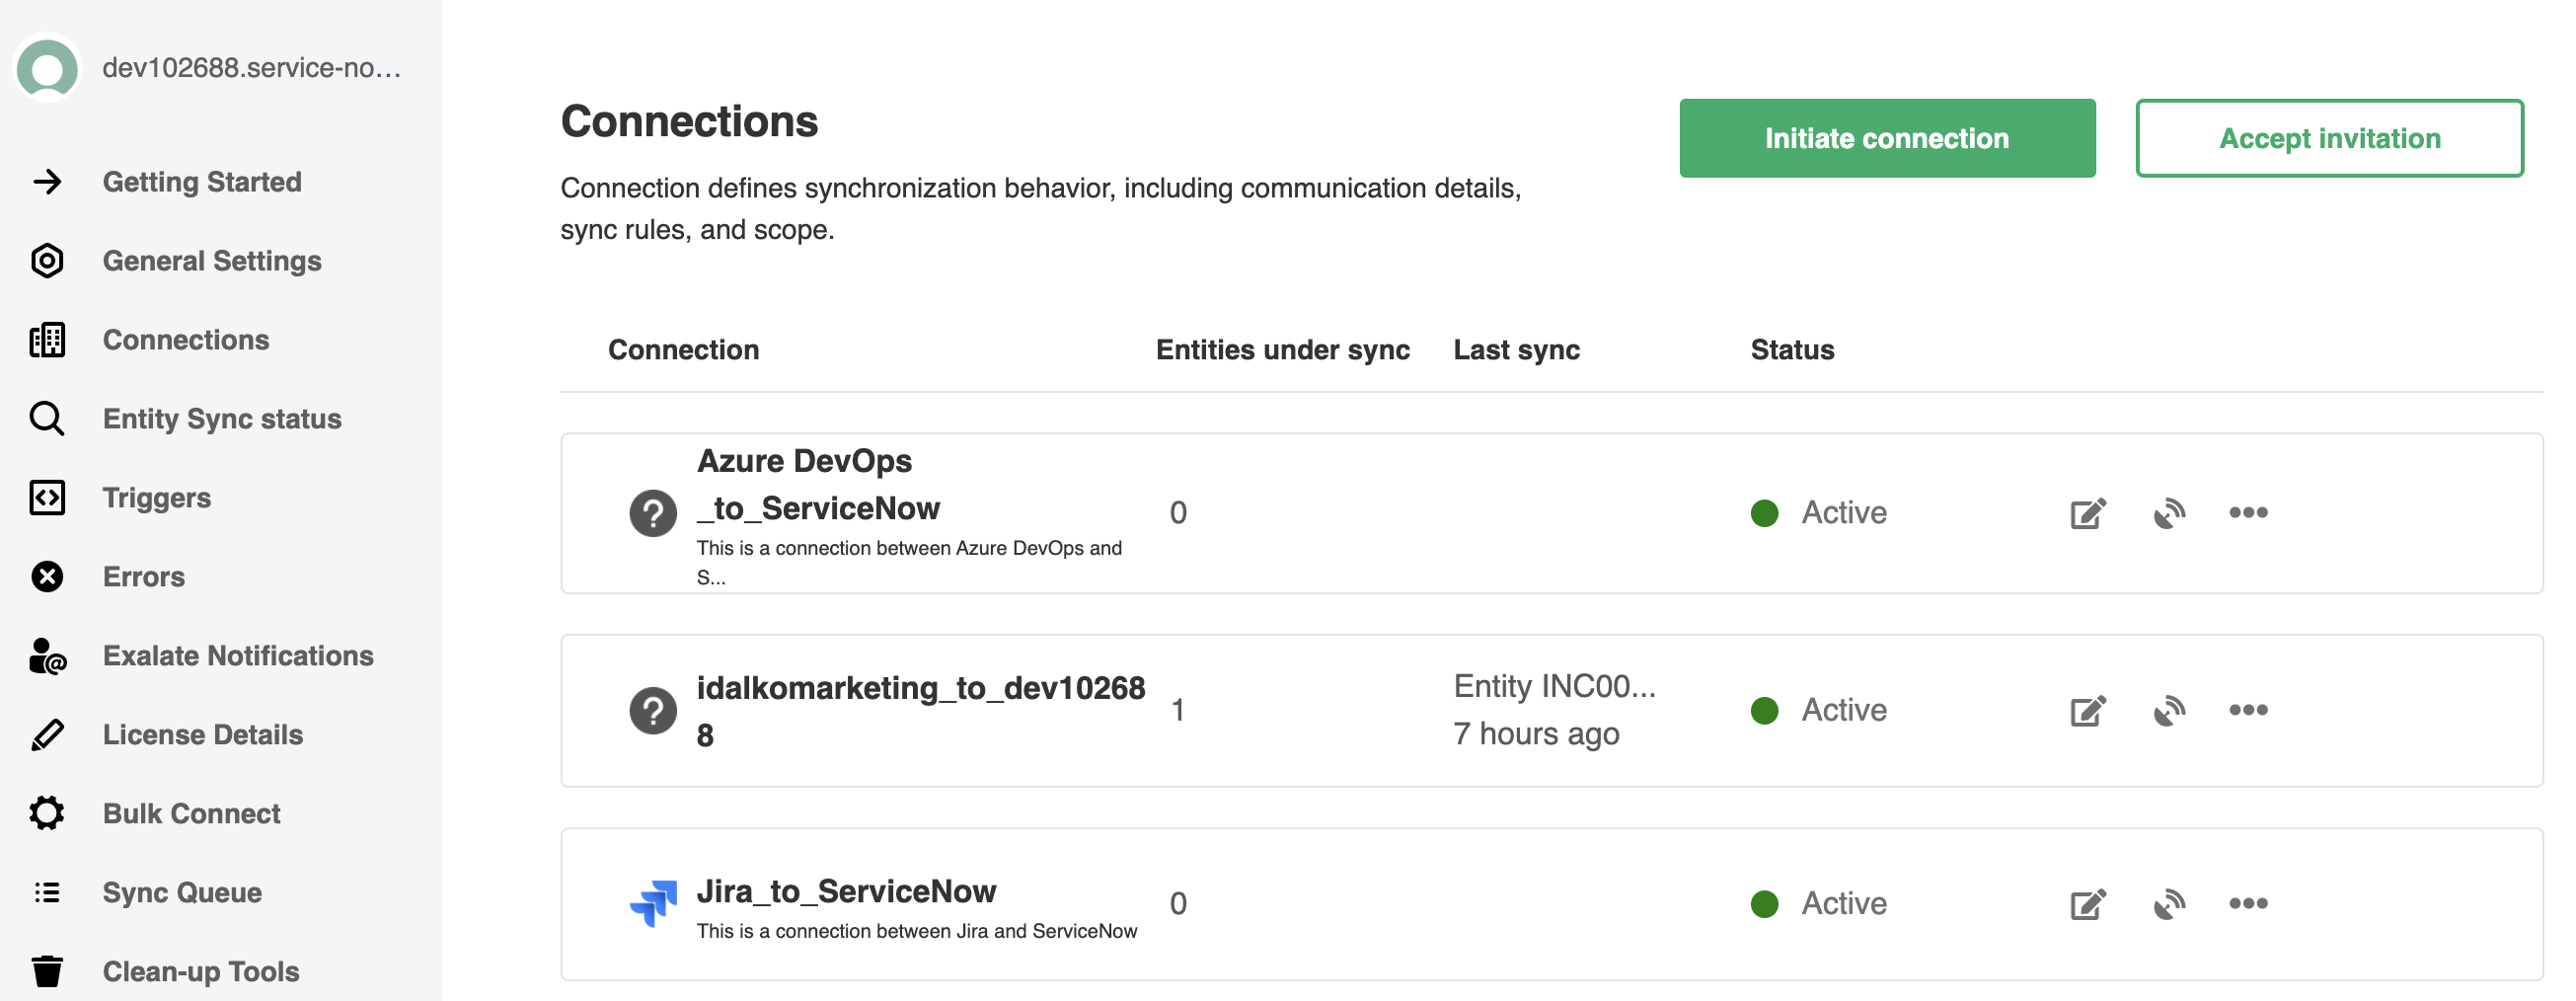 Accept invitation on the ServiceNow instance